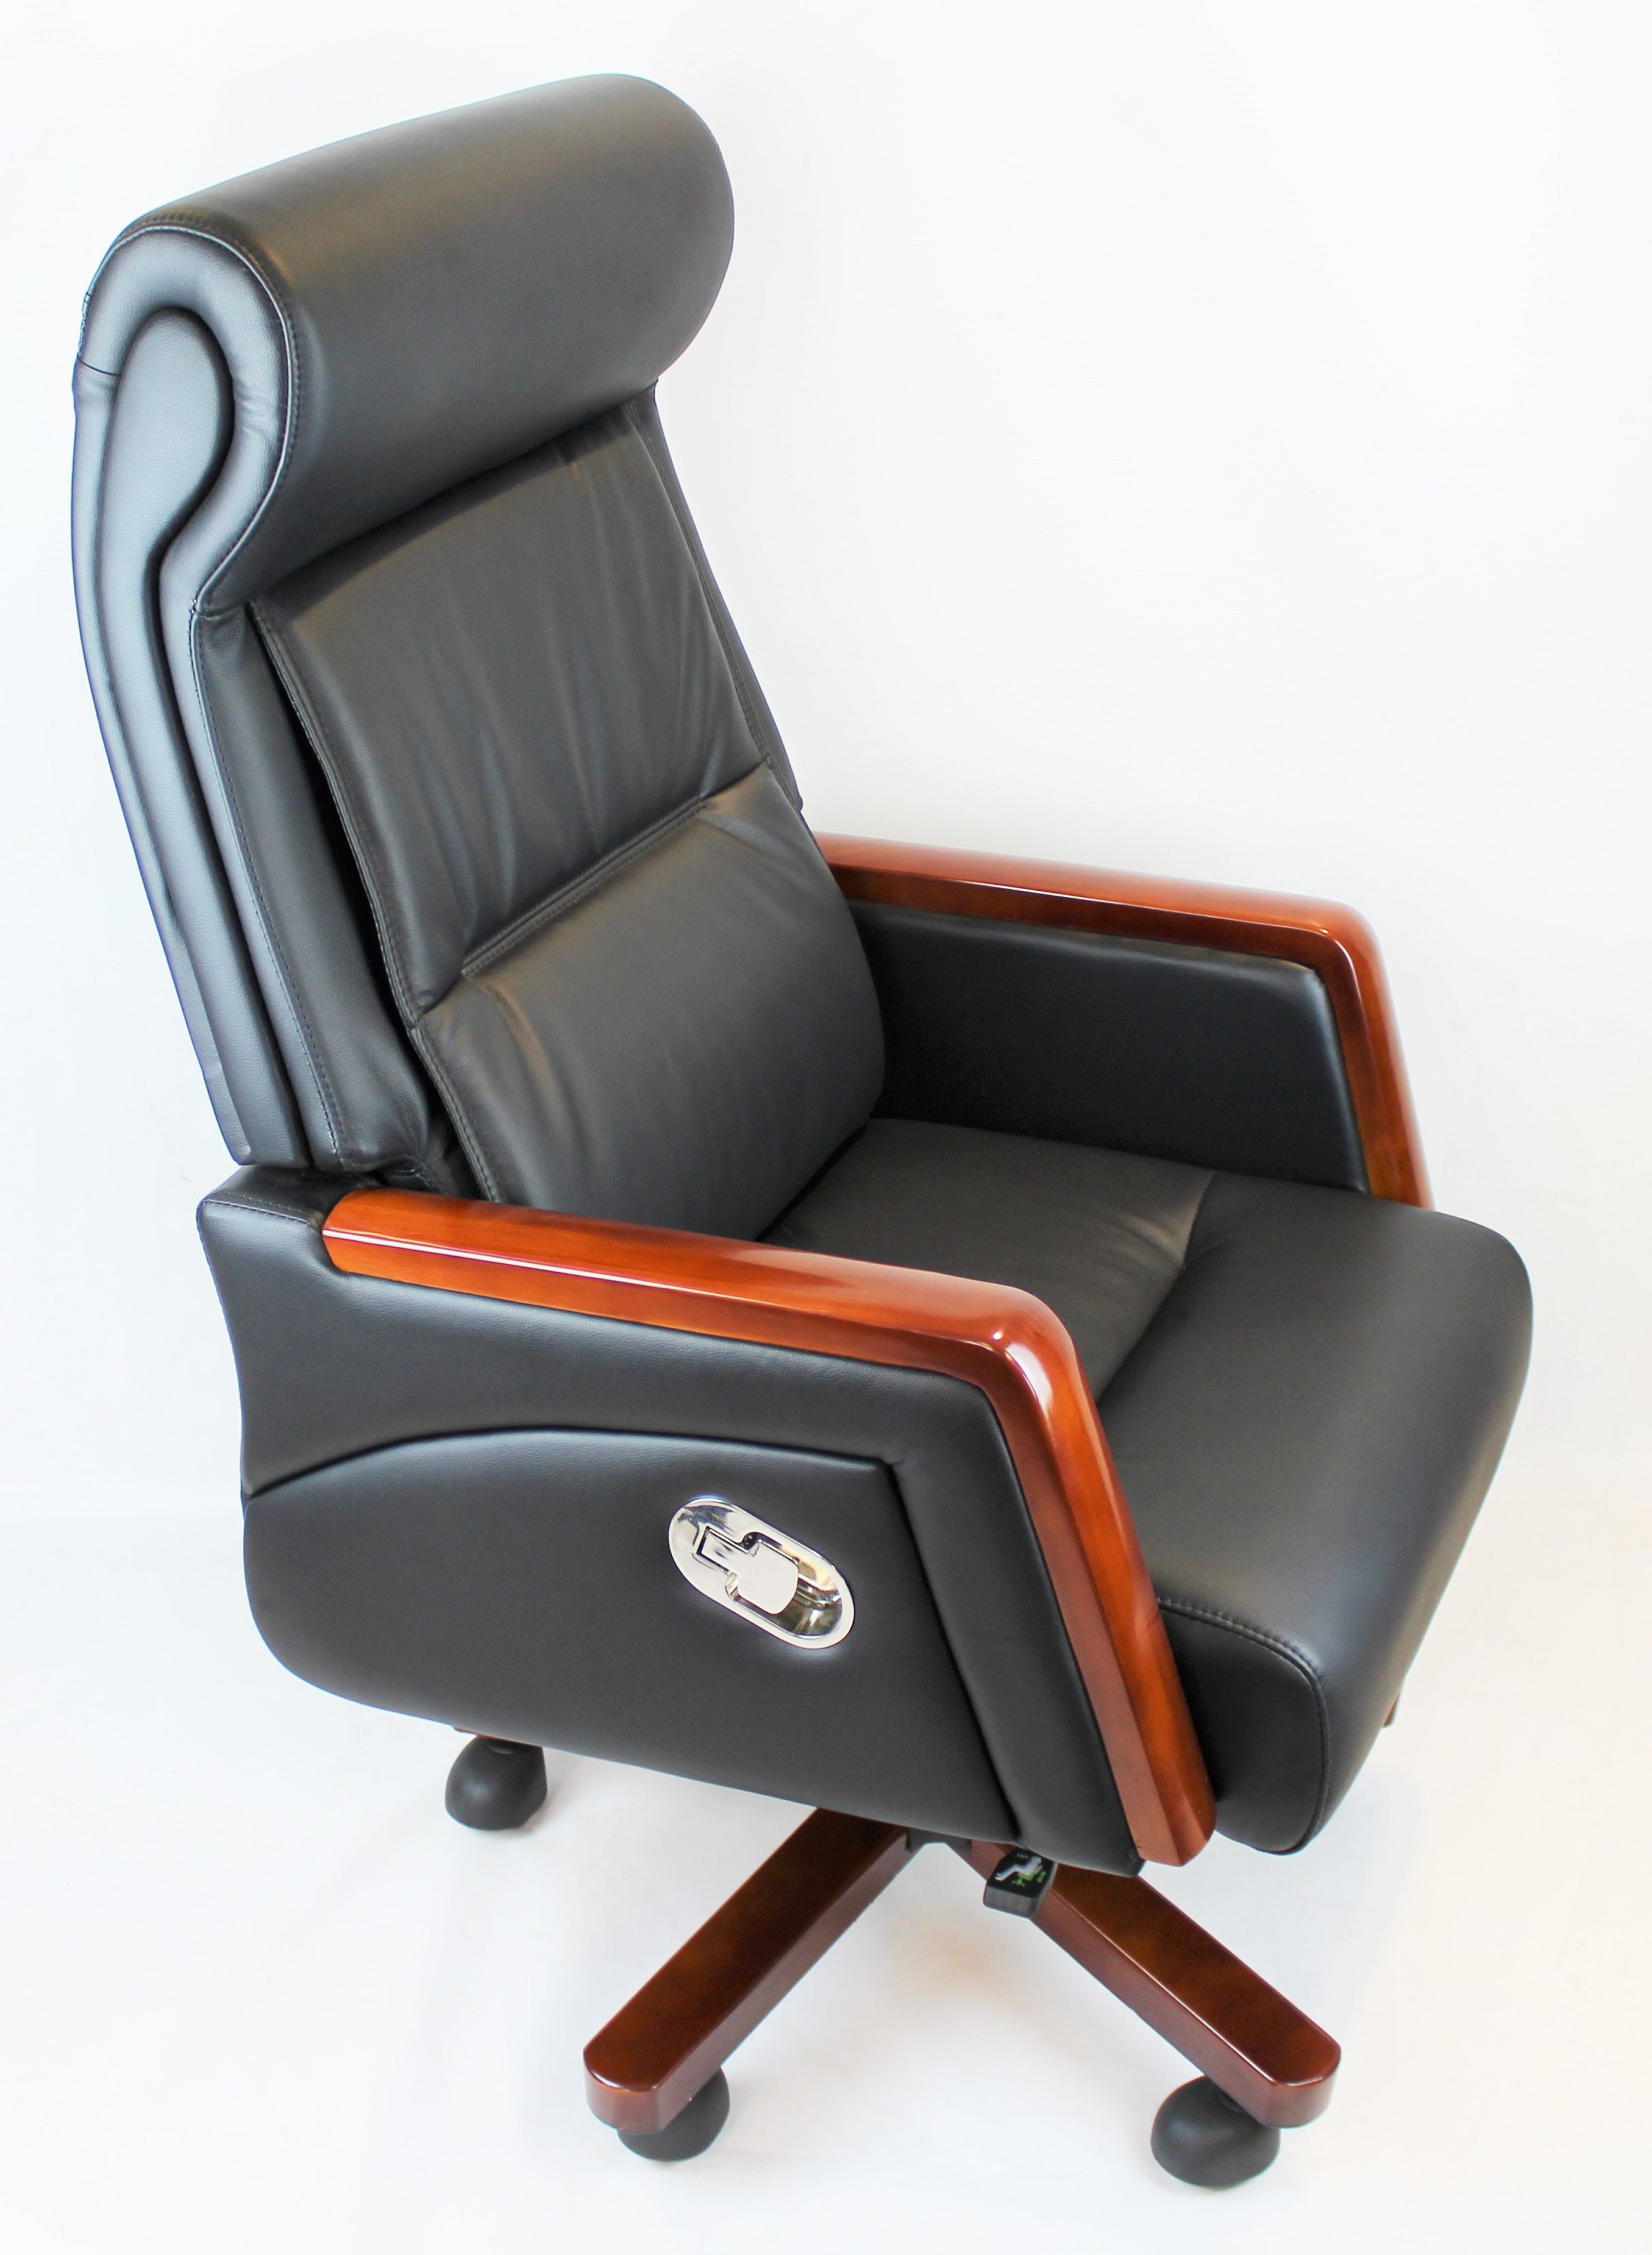 Reclining Black Leather Executive Office Chair with Wooden Arms - SZ-A109 Huddersfield